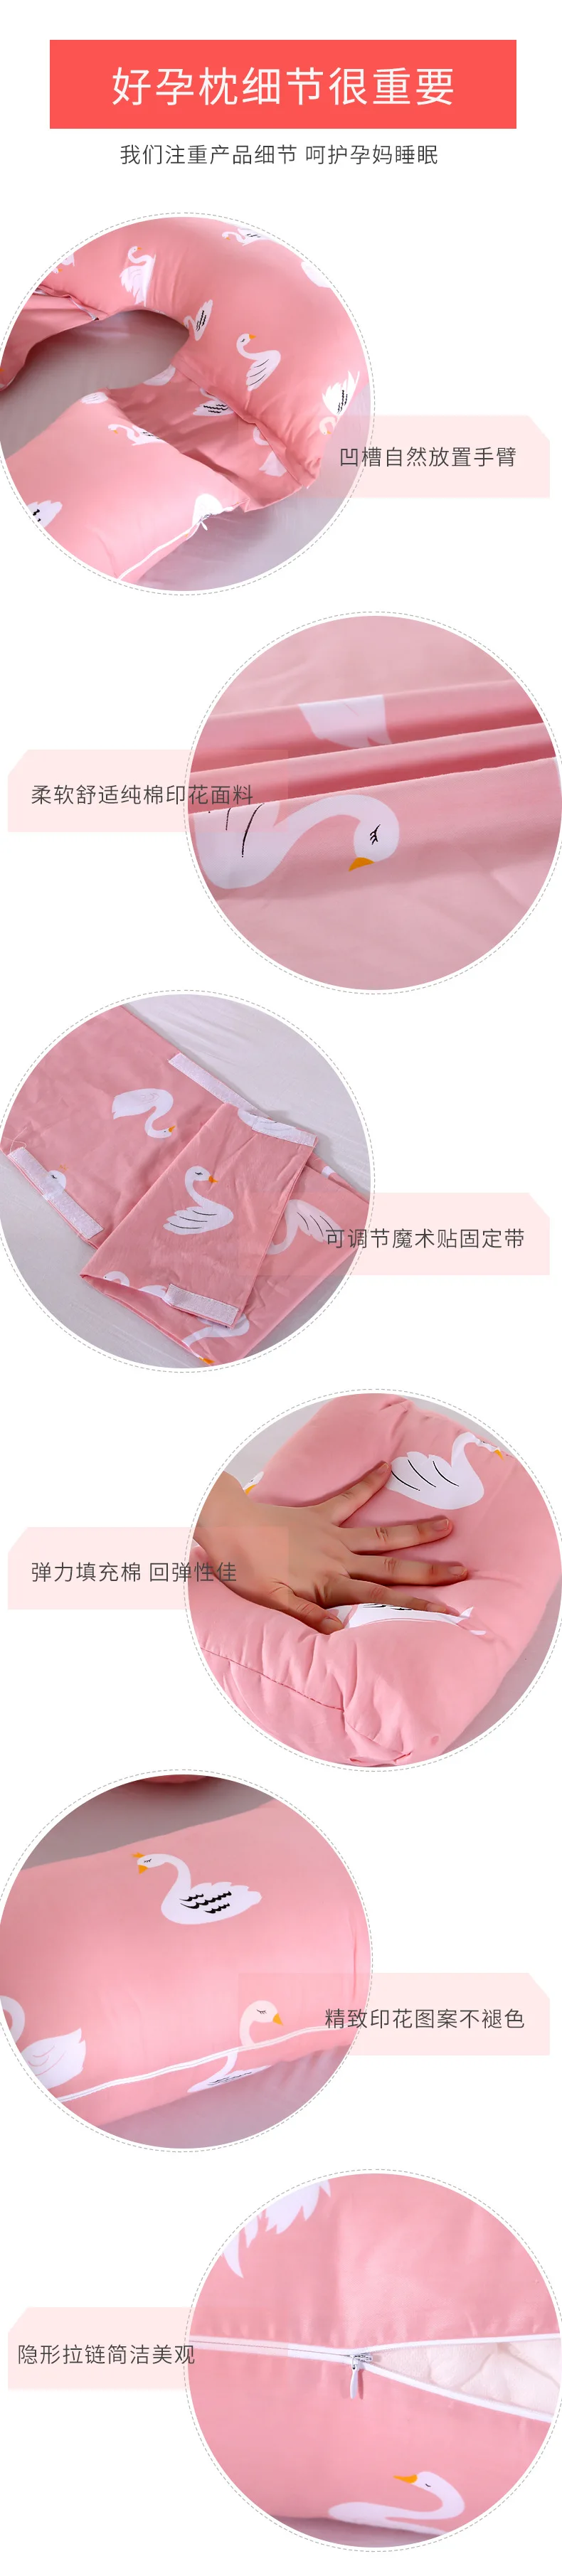 Manufacturers Direct Selling Tmall OEM Multi-functional G-Shape Pregnancy Pillow Waist Support Sleeping Pillow Pregnant Women Pi